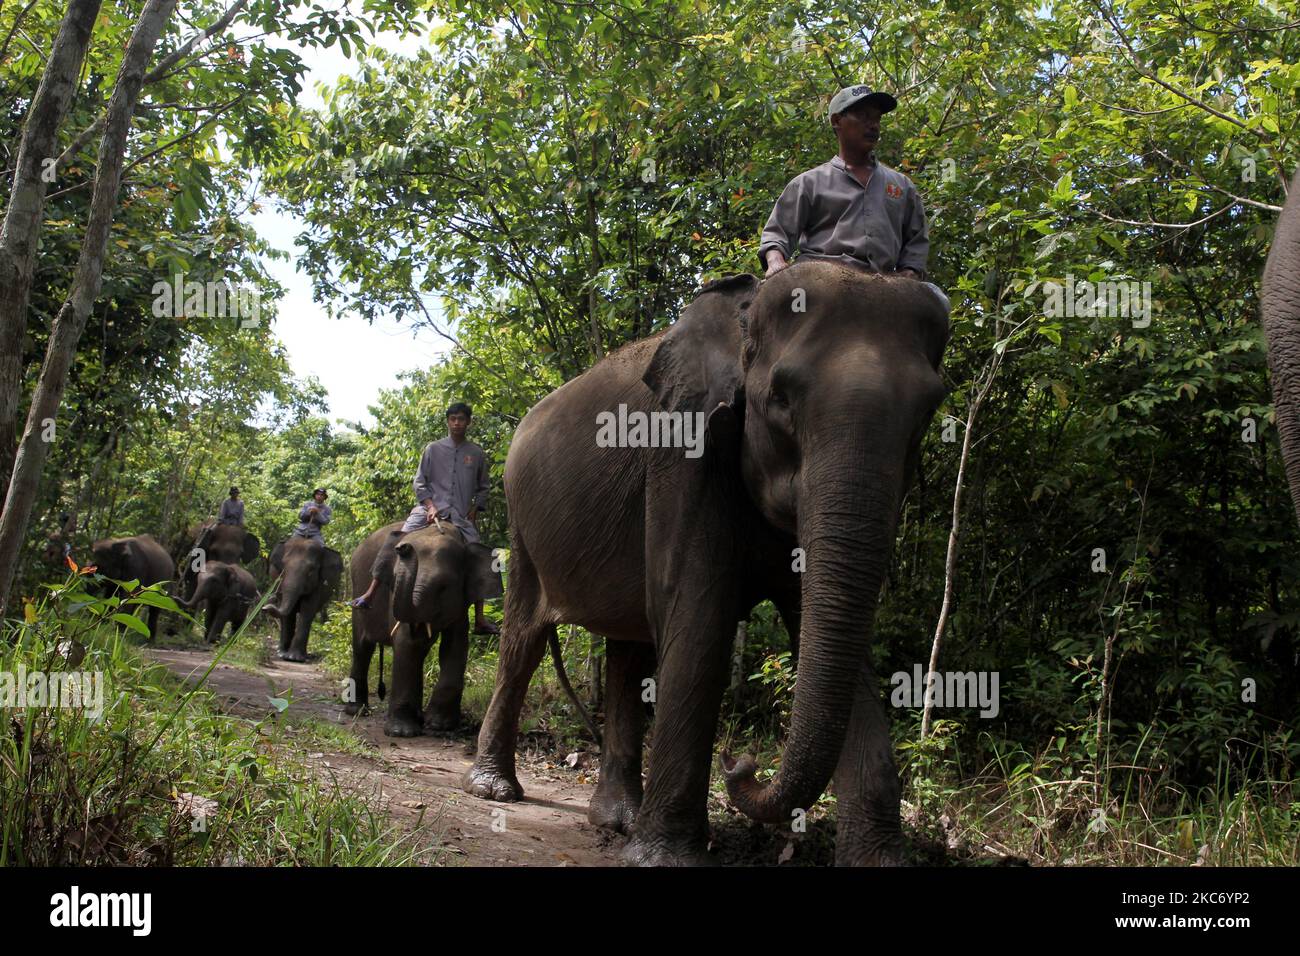 Mahout from the Elephant Response Unit (ERU) bathes the elephants sumatran and gives them vitamins before patrol the Way Kambas National Park (TNWK), Tegal Yoso camp in East Lampung Regency, Lampung, Indosia, on January 4, 2021. The elephants in the Elephant Response Unit (ERU) who have been tame and have been trained to assist humans in reconciling human conflicts with wild elephants that enter residential areas and fields to be escorted into the forest in the National Park area. (Photo by Dasril Roszandi/NurPhoto) Stock Photo